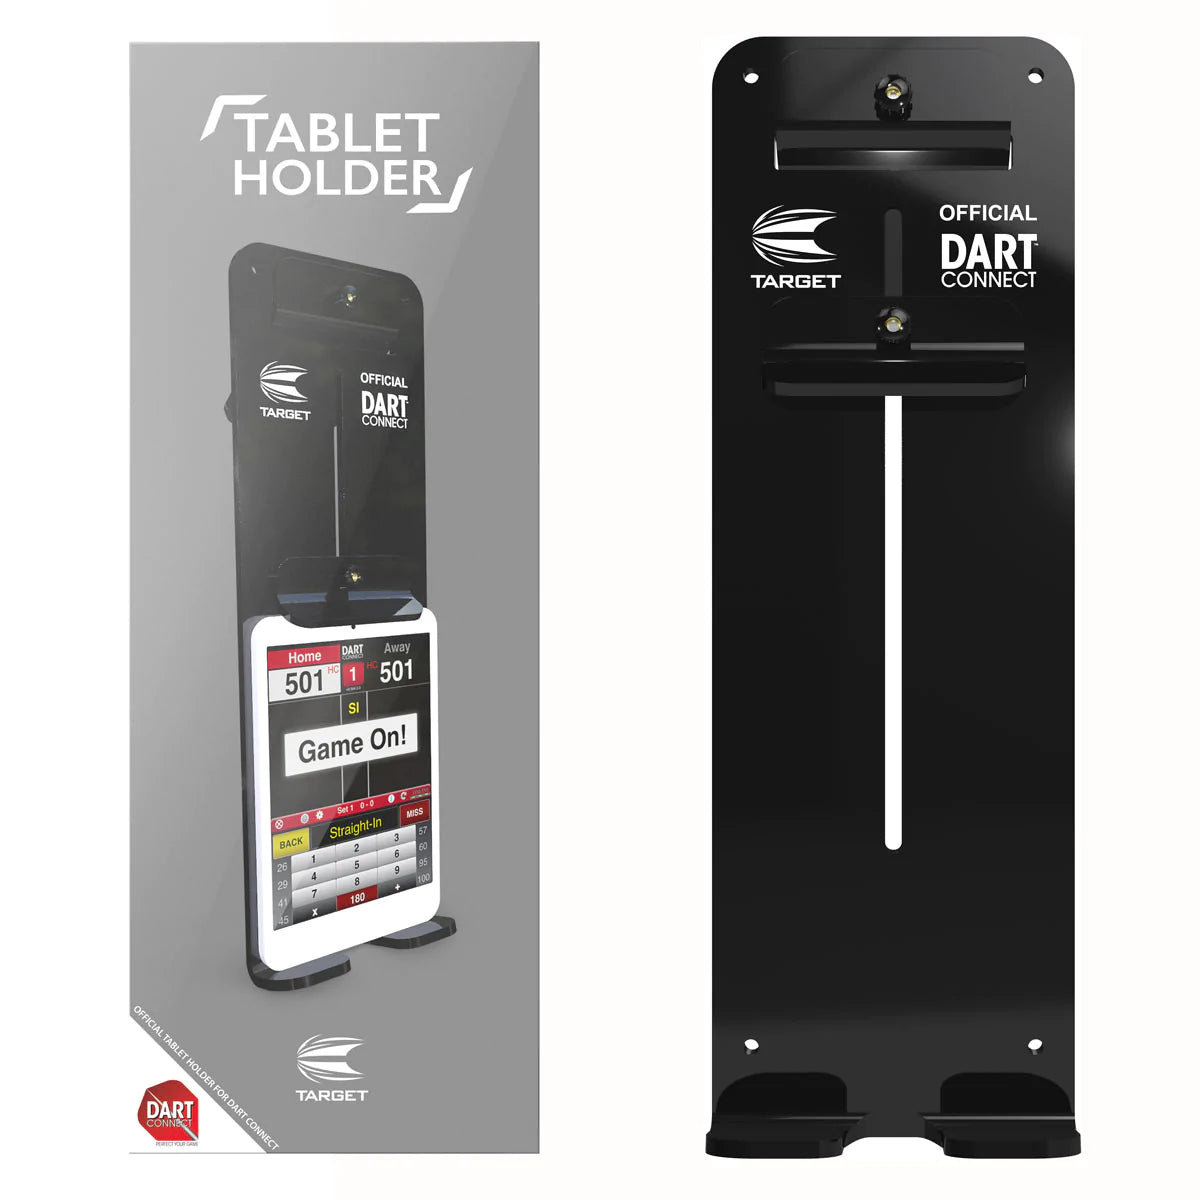 TARGET Official Darts Connect Scoring Tablet and Phone Holder